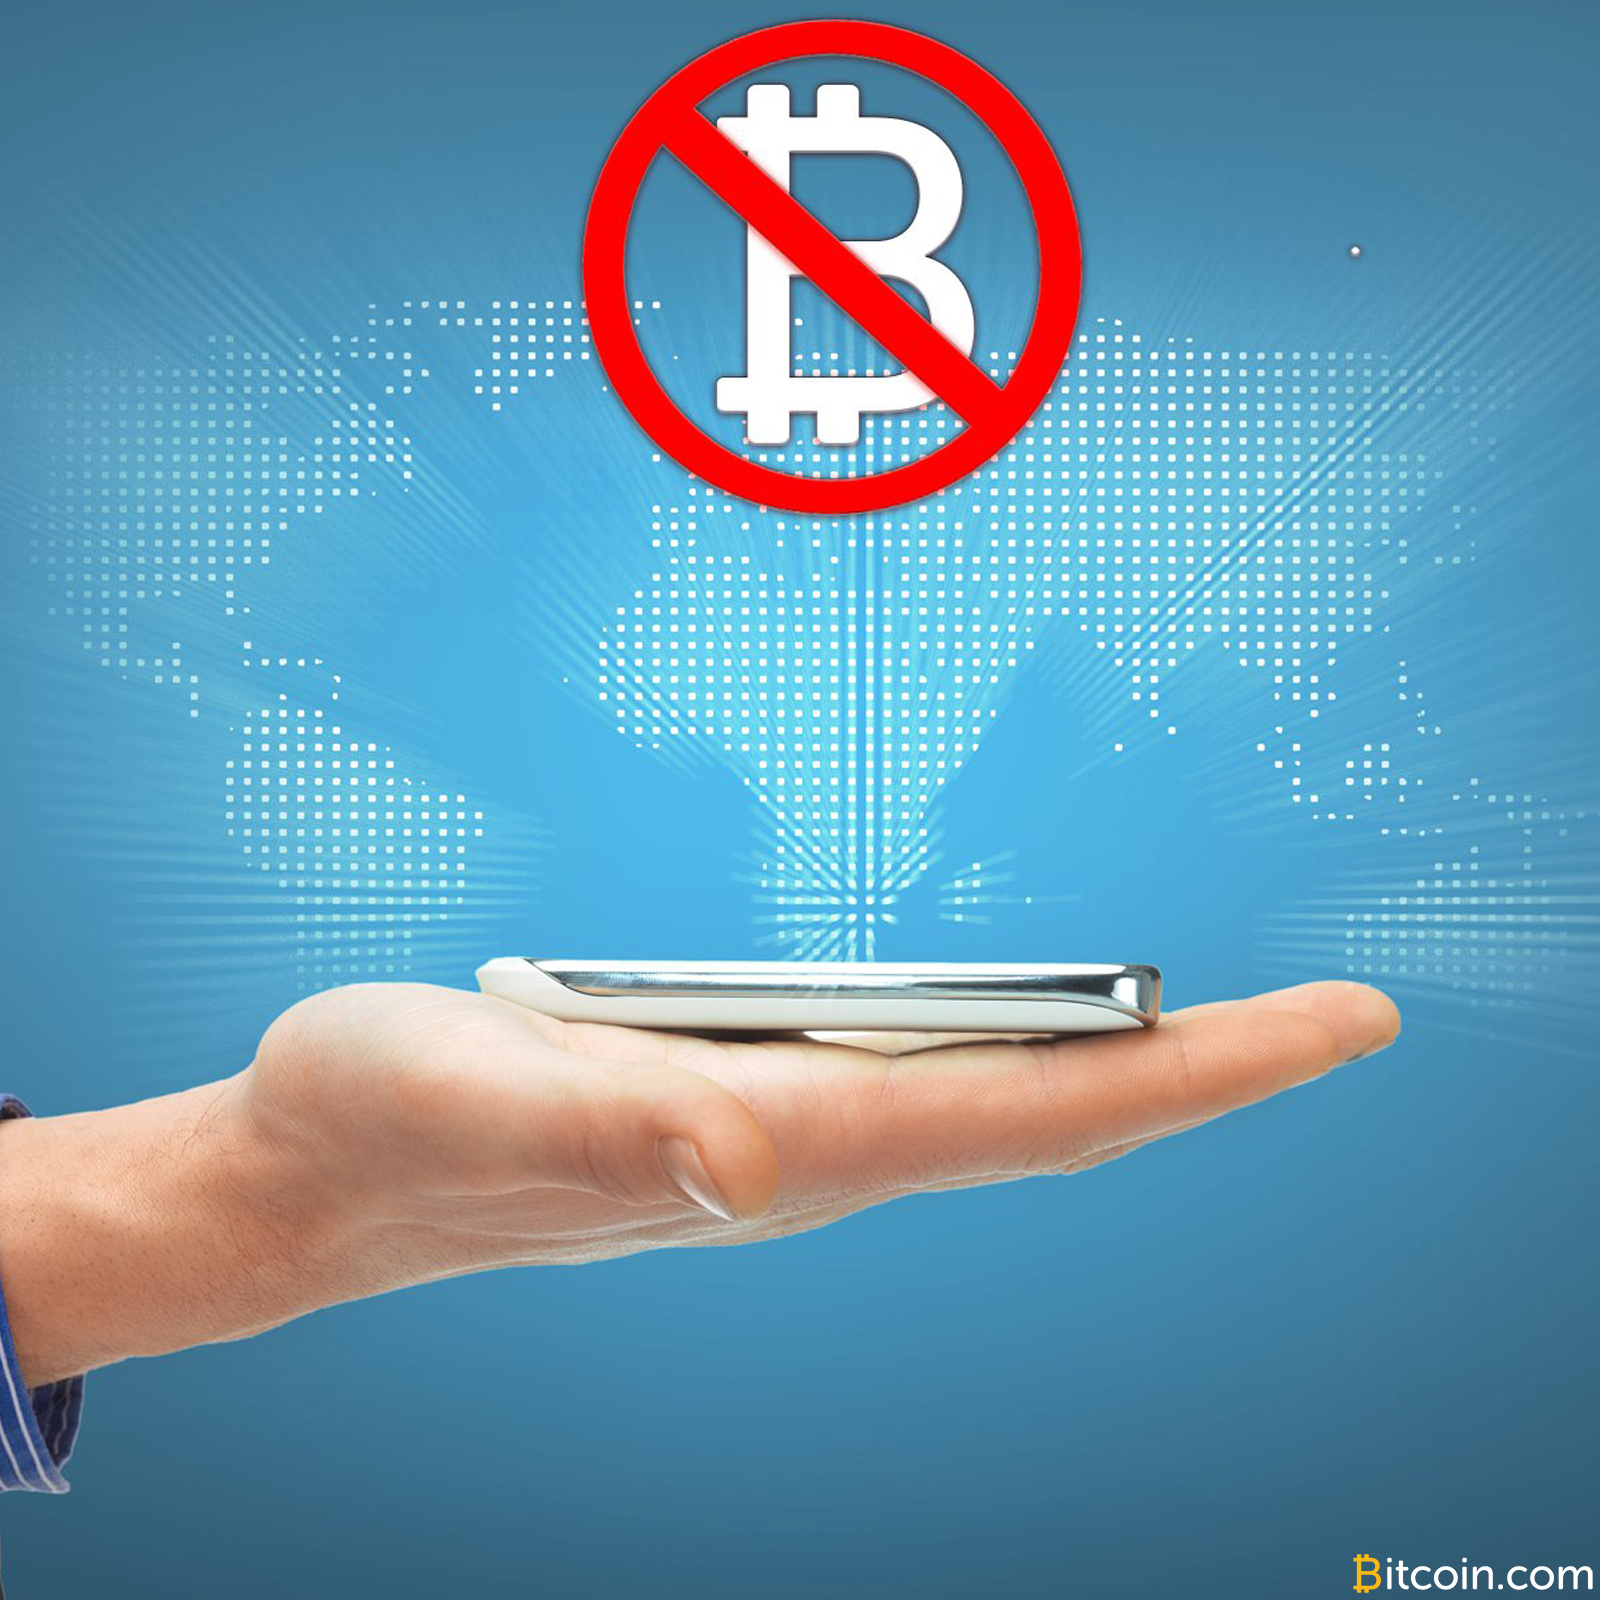 Remittance Startup Bitspark Drops Bitcoin Over Network Fees